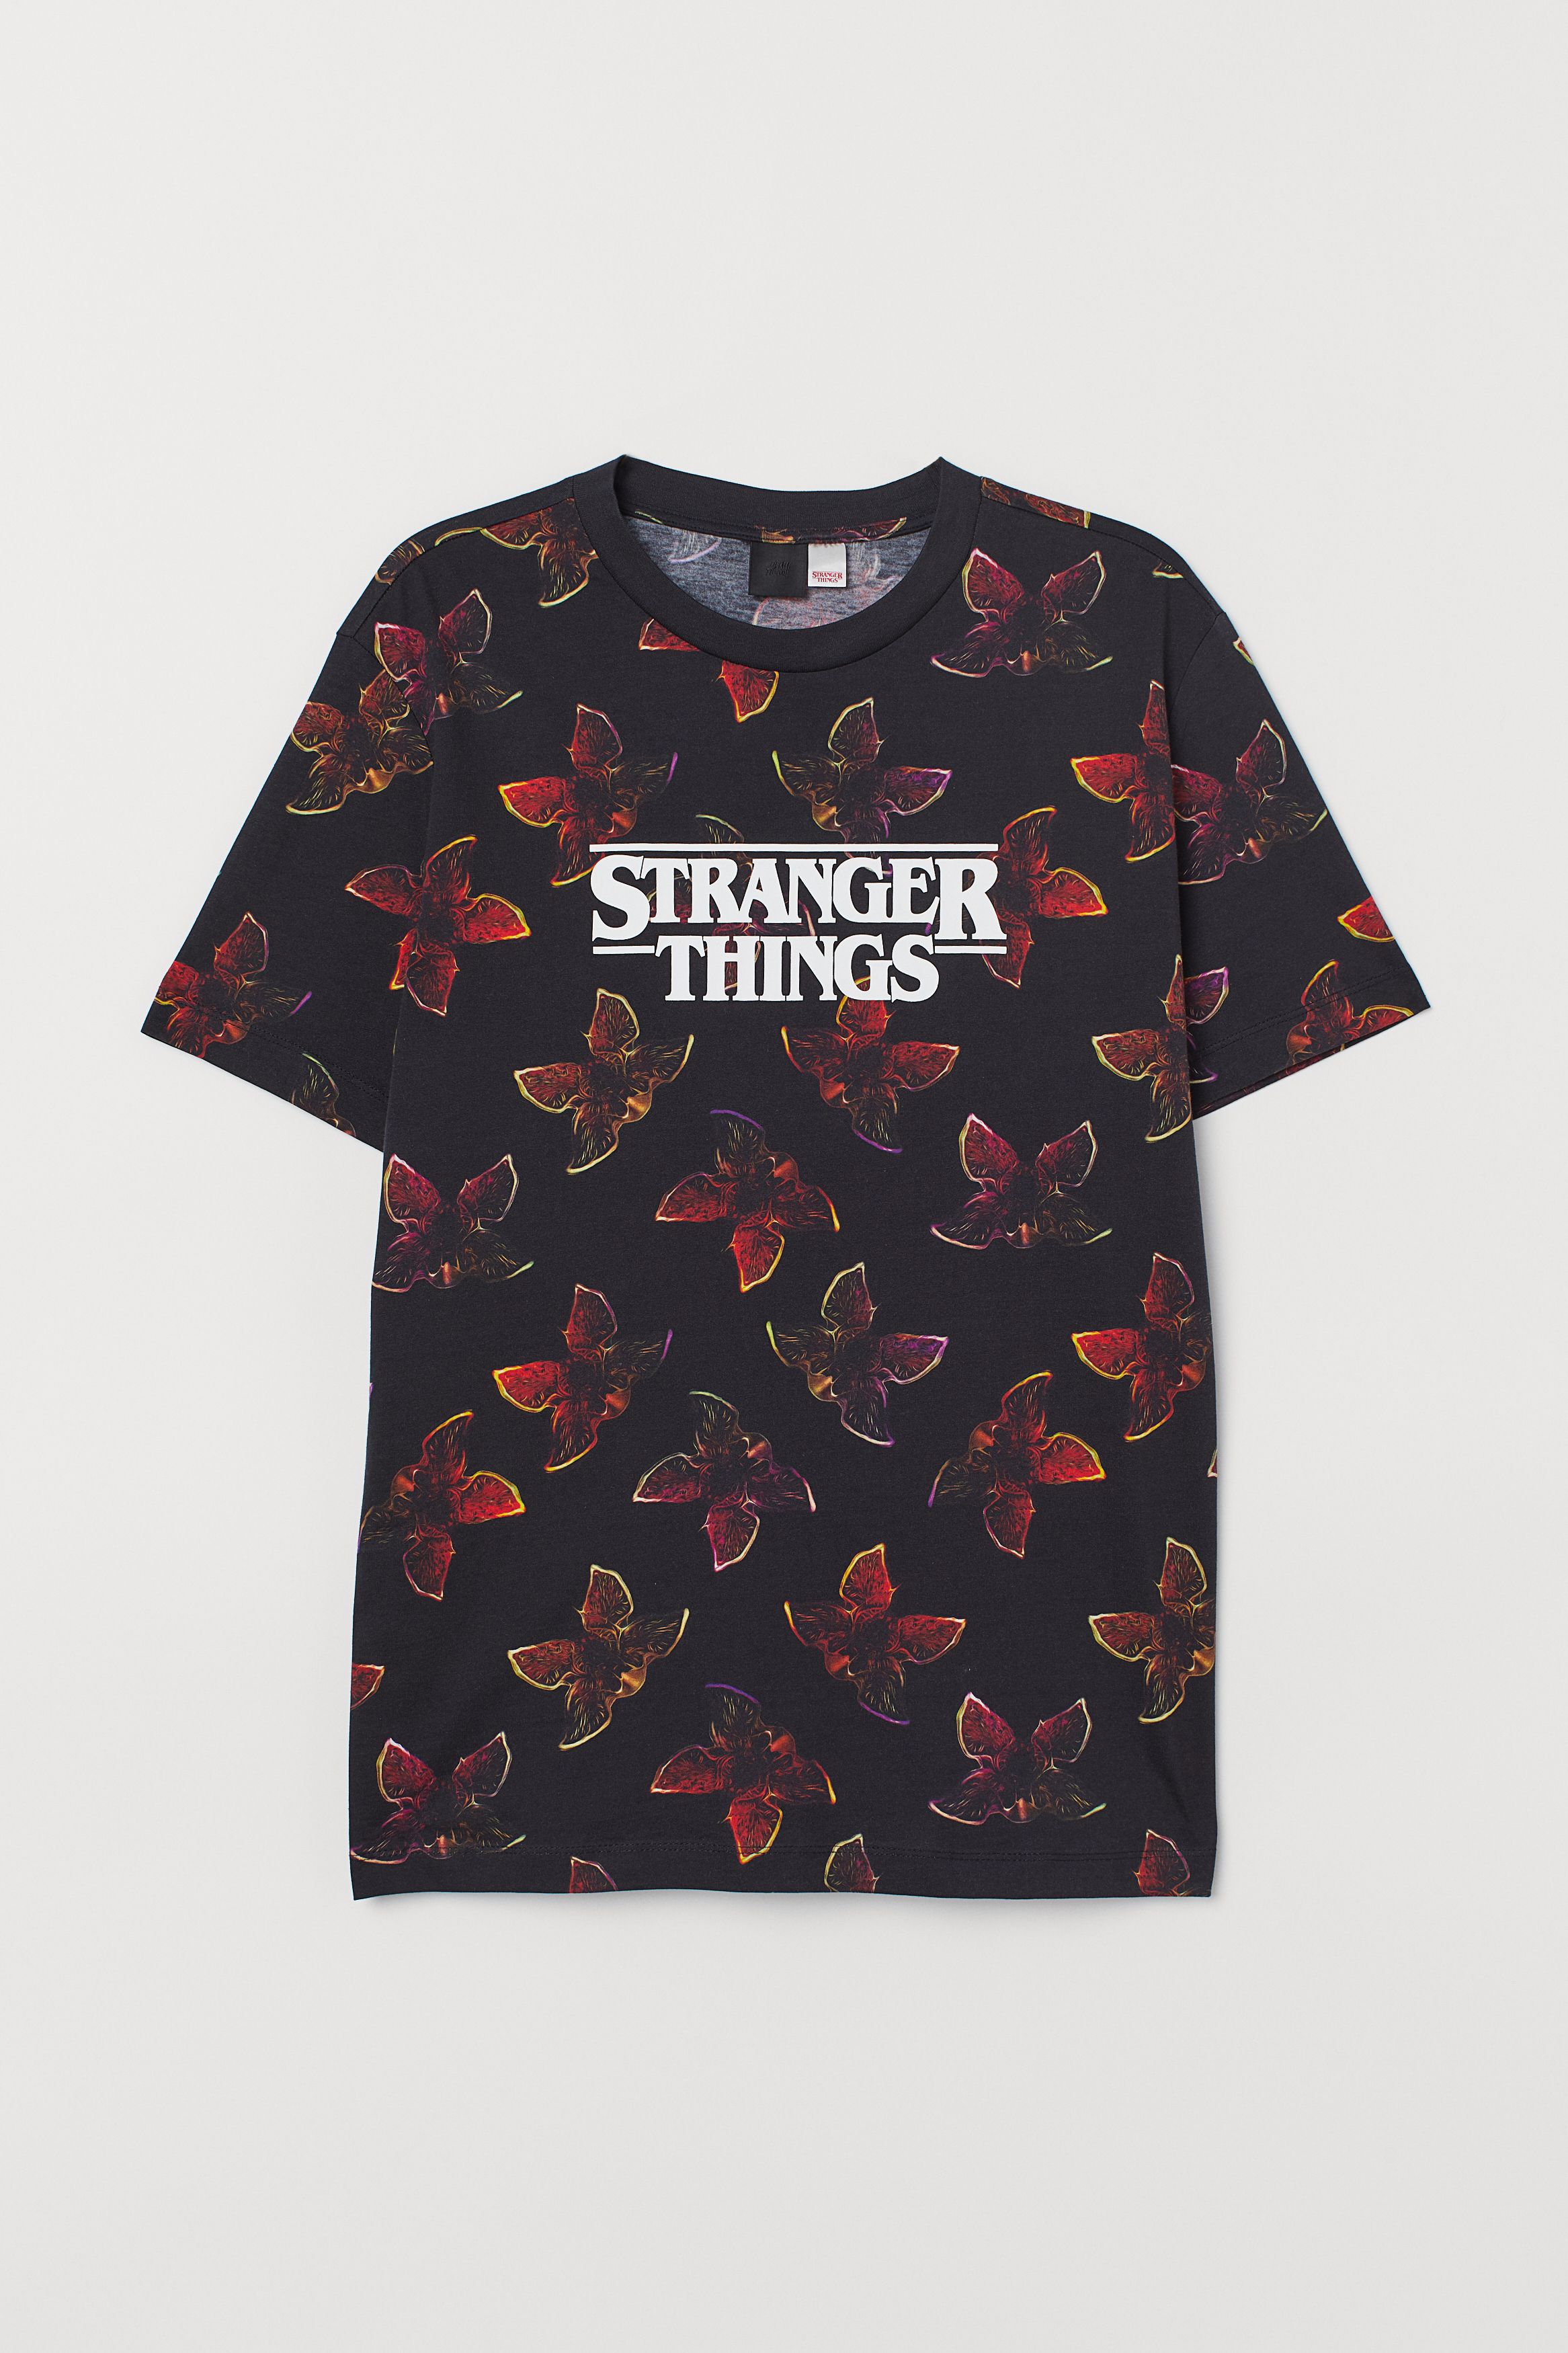 Every piece from the H&M x Stranger Things collection